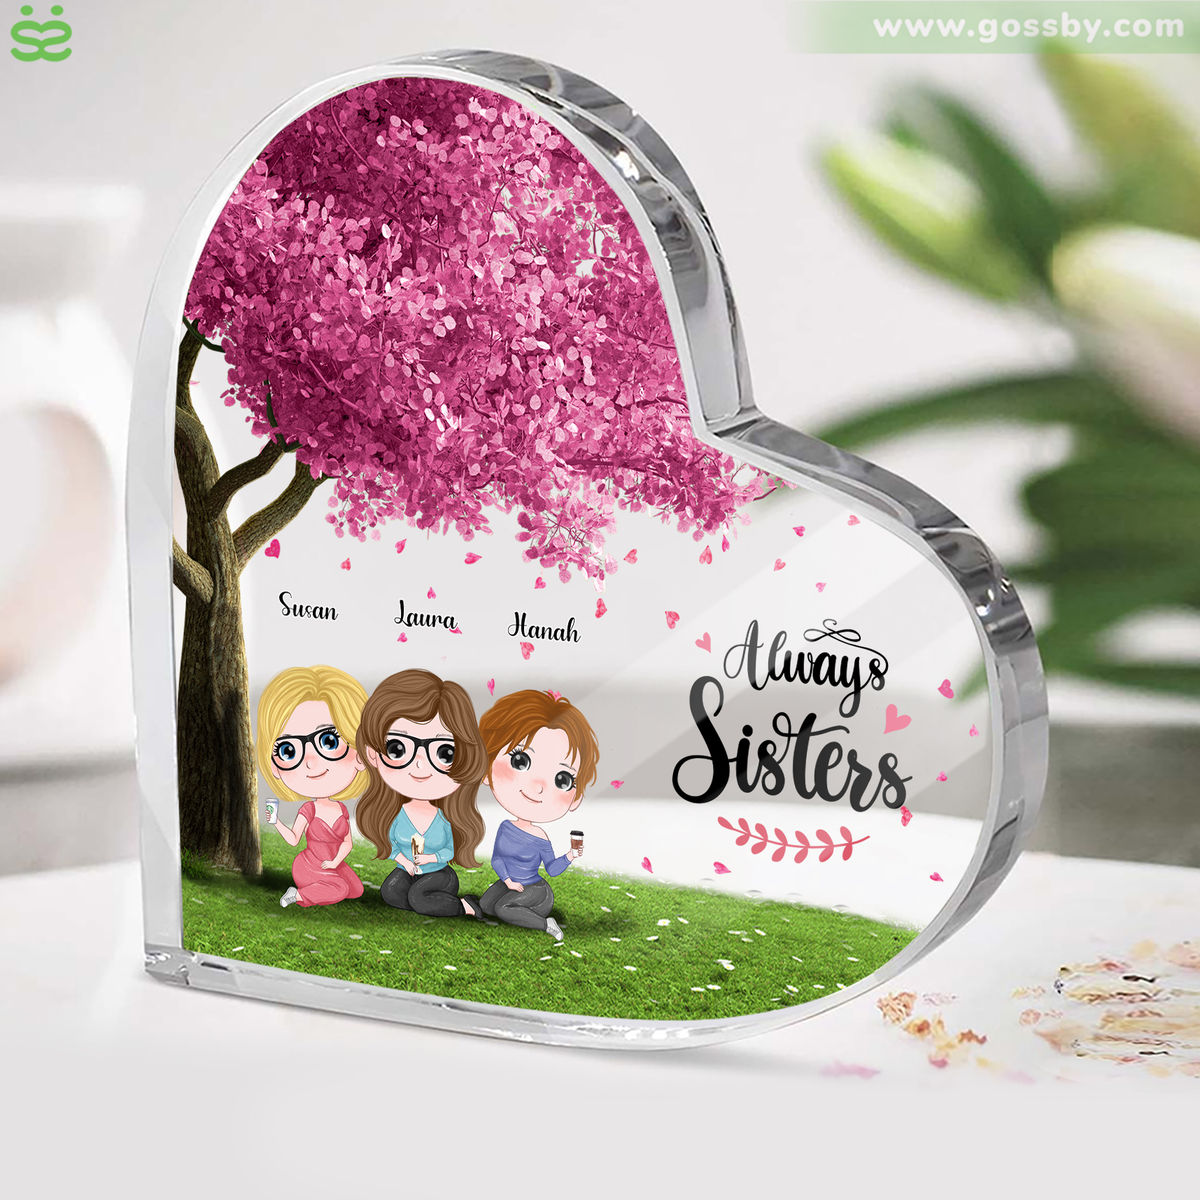 Personalized Desktop - Transparent Plaque - Sisters/ Best Friends Gifts - Chibi Girls - Always Sisters (Custom Heart-Shaped Acrylic Plaque)